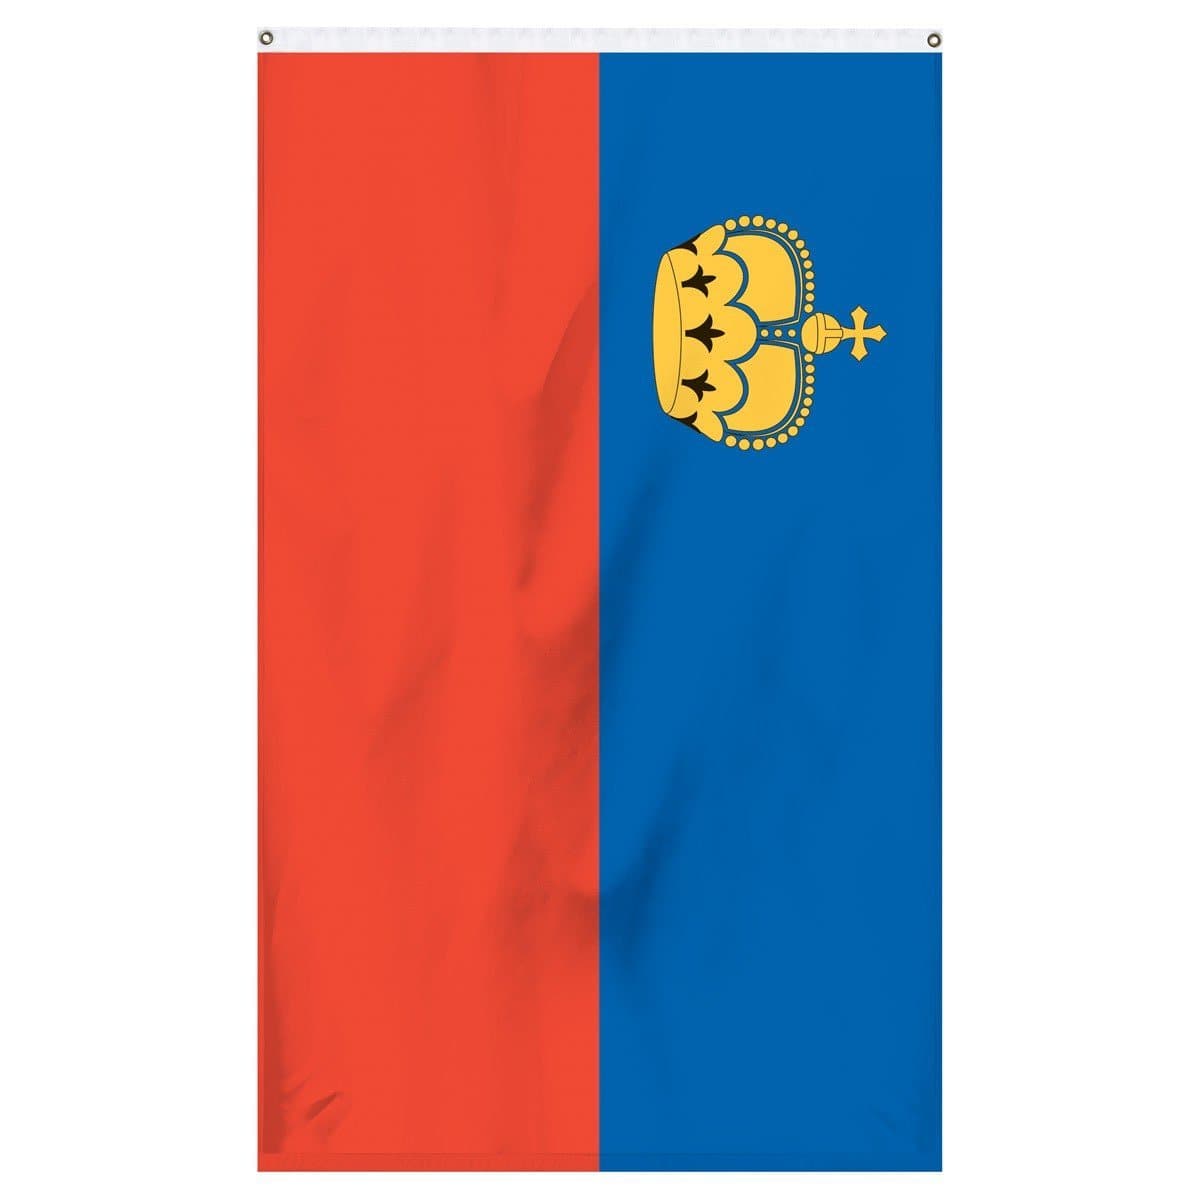 The national flag of Liechtenstein for sale to buy online for parades, flagpoles, and flag collections.